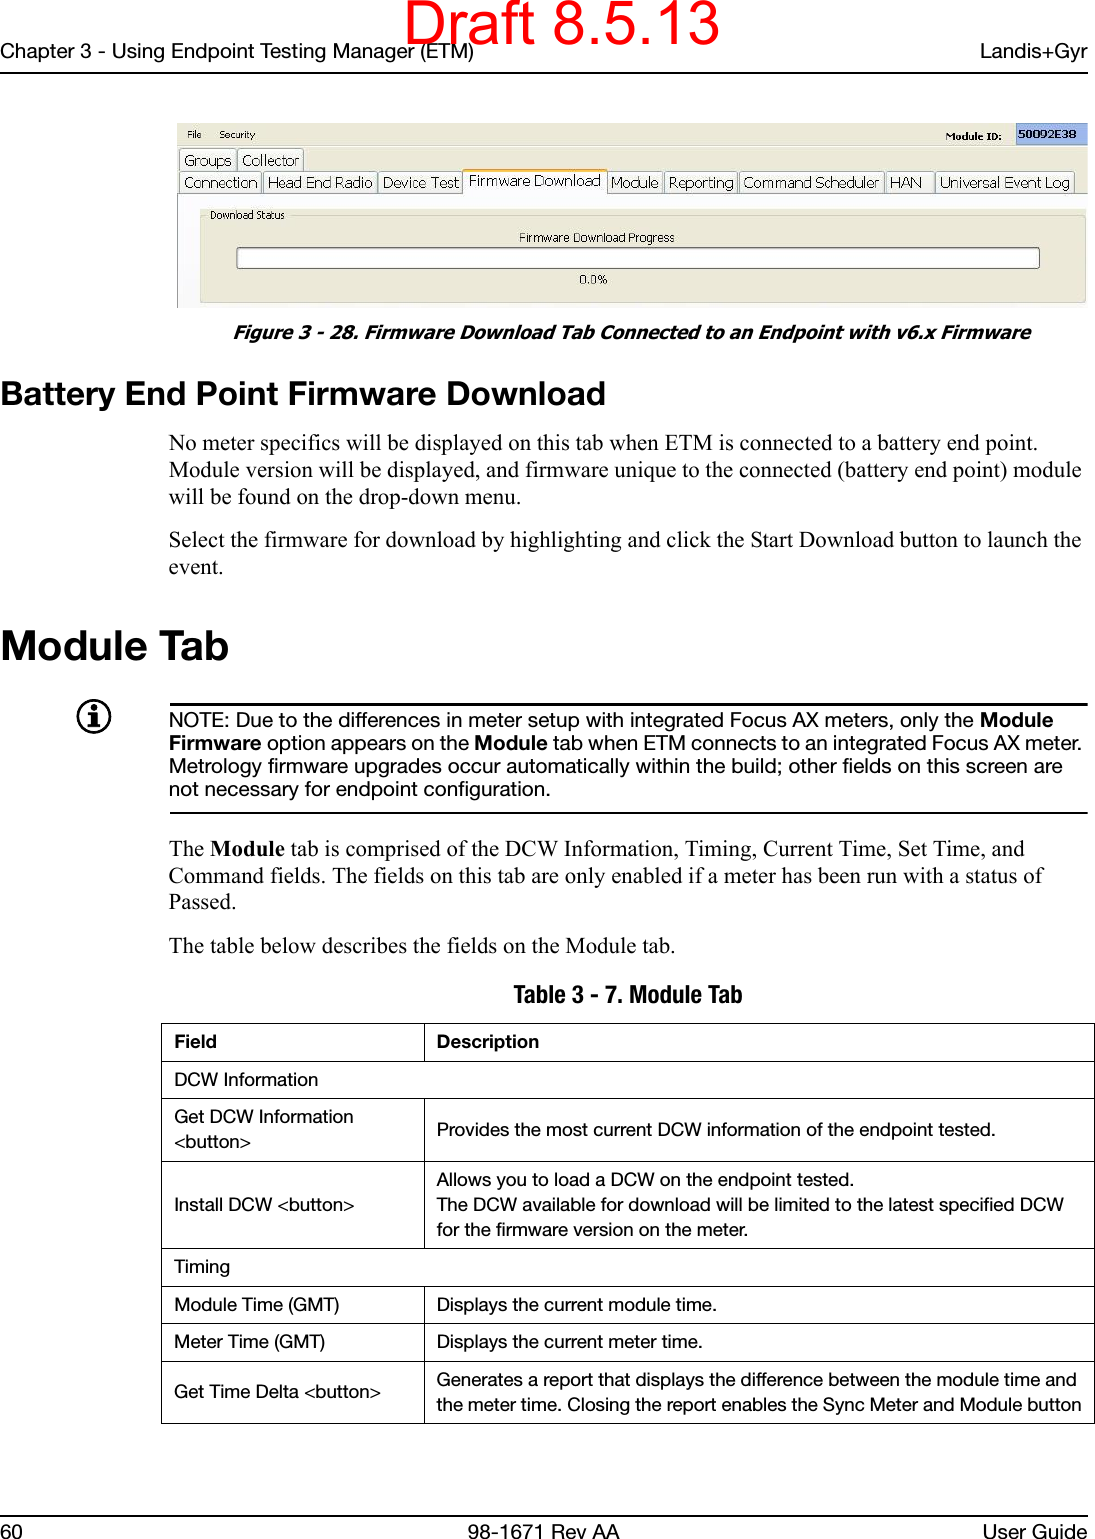 Chapter 3 - Using Endpoint Testing Manager (ETM) Landis+Gyr60 98-1671 Rev AA User Guide Figure 3 - 28. Firmware Download Tab Connected to an Endpoint with v6.x FirmwareBattery End Point Firmware DownloadNo meter specifics will be displayed on this tab when ETM is connected to a battery end point. Module version will be displayed, and firmware unique to the connected (battery end point) module will be found on the drop-down menu.Select the firmware for download by highlighting and click the Start Download button to launch the event.Module TabNOTE: Due to the differences in meter setup with integrated Focus AX meters, only the Module Firmware option appears on the Module tab when ETM connects to an integrated Focus AX meter. Metrology firmware upgrades occur automatically within the build; other fields on this screen are not necessary for endpoint configuration.The Module tab is comprised of the DCW Information, Timing, Current Time, Set Time, and Command fields. The fields on this tab are only enabled if a meter has been run with a status of Passed. The table below describes the fields on the Module tab. Table 3 - 7. Module TabField DescriptionDCW InformationGet DCW Information &lt;button&gt; Provides the most current DCW information of the endpoint tested.Install DCW &lt;button&gt;Allows you to load a DCW on the endpoint tested.The DCW available for download will be limited to the latest specified DCW for the firmware version on the meter.TimingModule Time (GMT) Displays the current module time.Meter Time (GMT) Displays the current meter time.Get Time Delta &lt;button&gt; Generates a report that displays the difference between the module time and the meter time. Closing the report enables the Sync Meter and Module buttonDraft 8.5.13